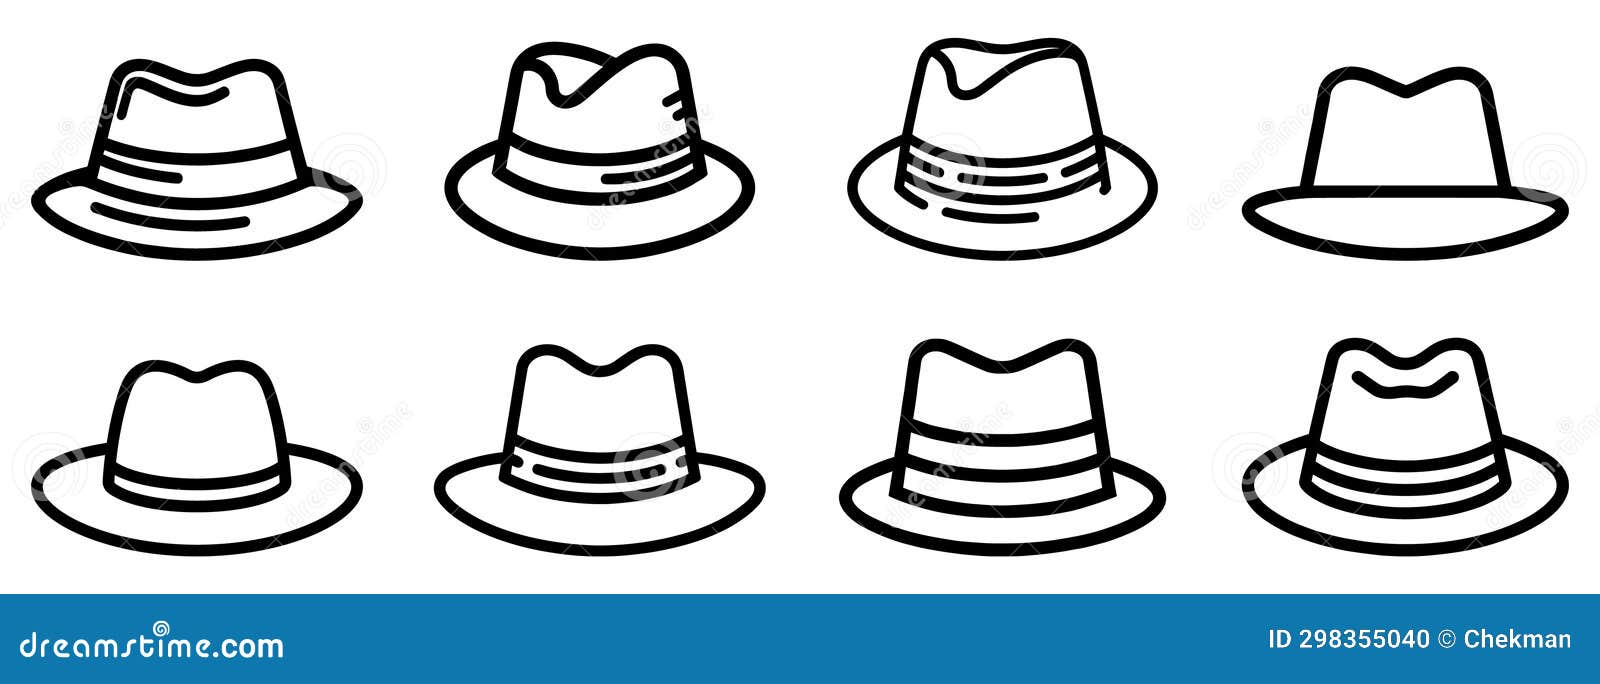 fedora hat icon. collection of line art drawings of various fedora hats.